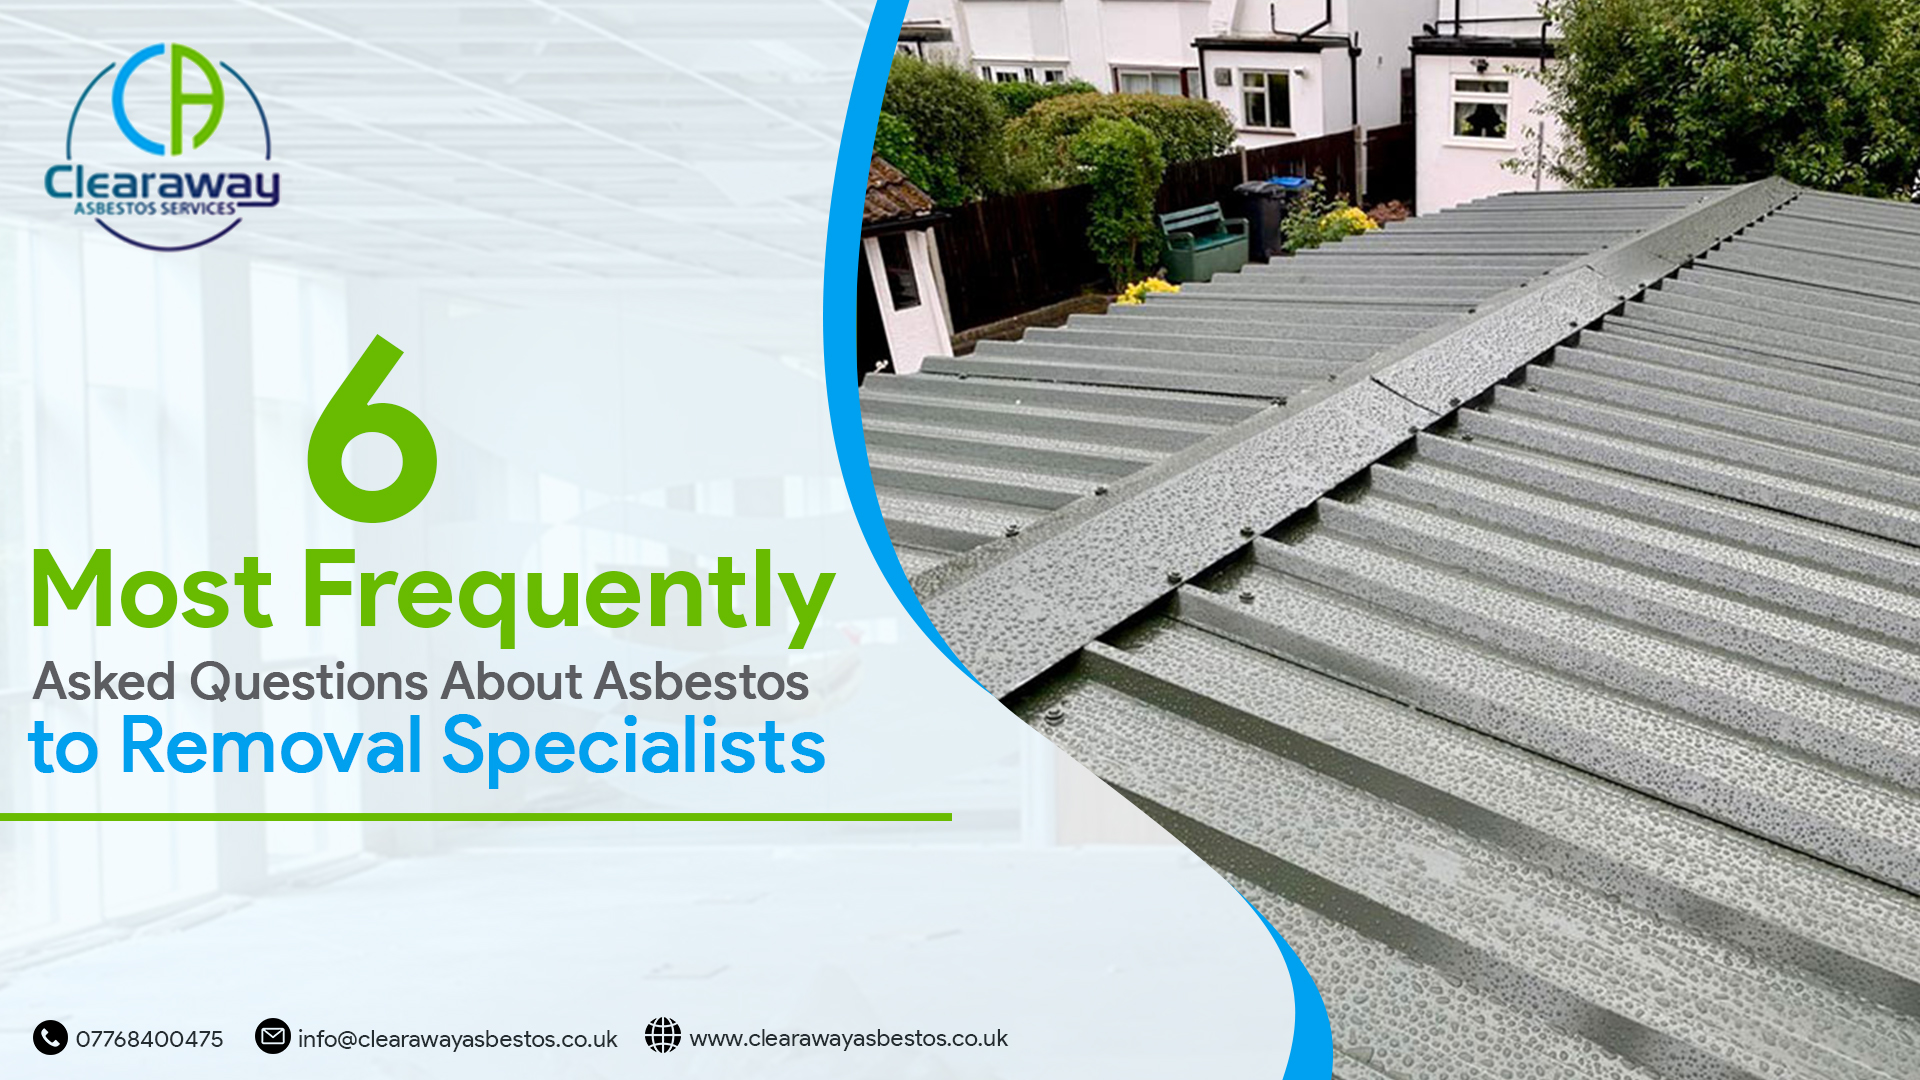 6 Most Frequently Asked Questions About Asbestos to Removal Specialists